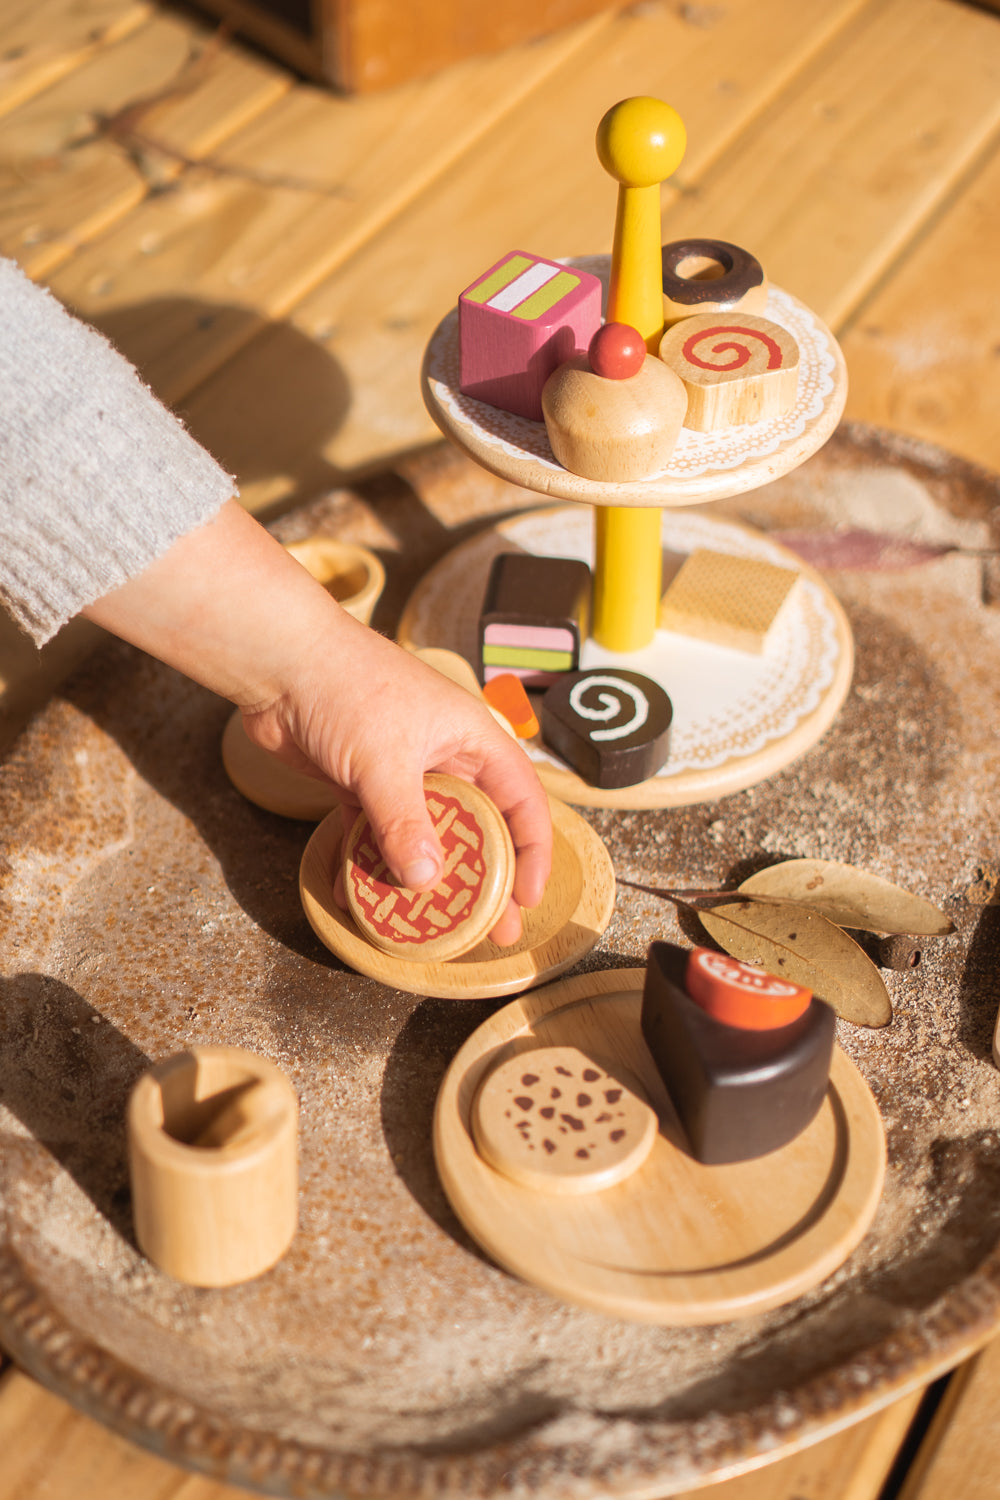 wooden-toy-cake-biscuits